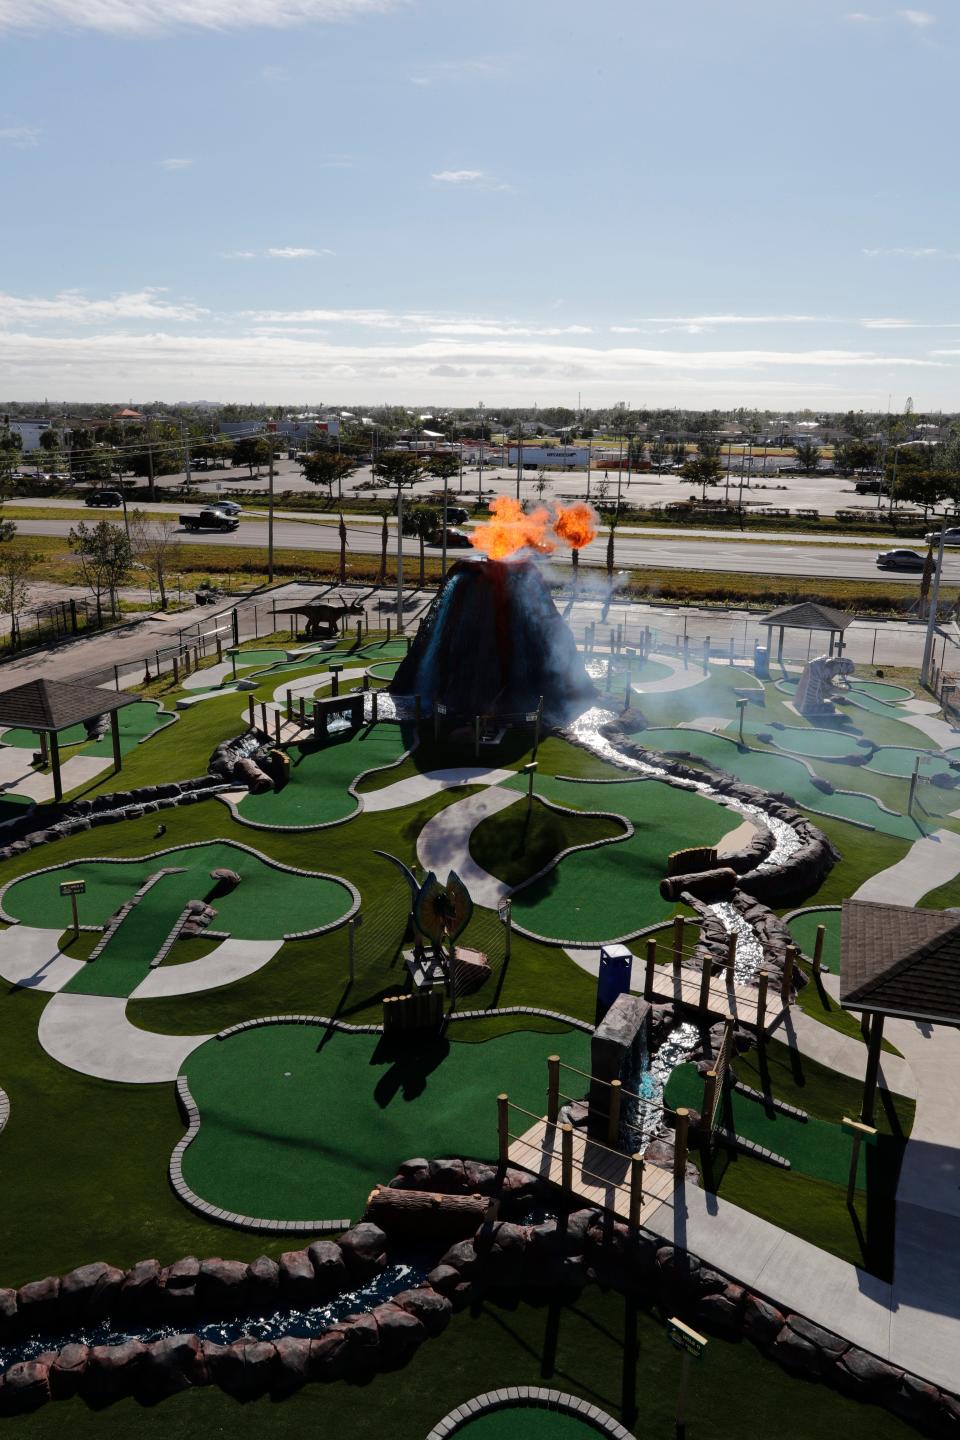 Cape CoralÕs Gator MikeÕs Family Fun Park opened Dinosaur Falls Mini Golf, an Orlando-style tourist attraction on Dec. 29, 2022. It features 19 holes of golf; nine moving, roaring animatronic dinosaurs; three waterfalls; and a 30-foot ÒvolcanoÓ spewing fireballs into the sky. 